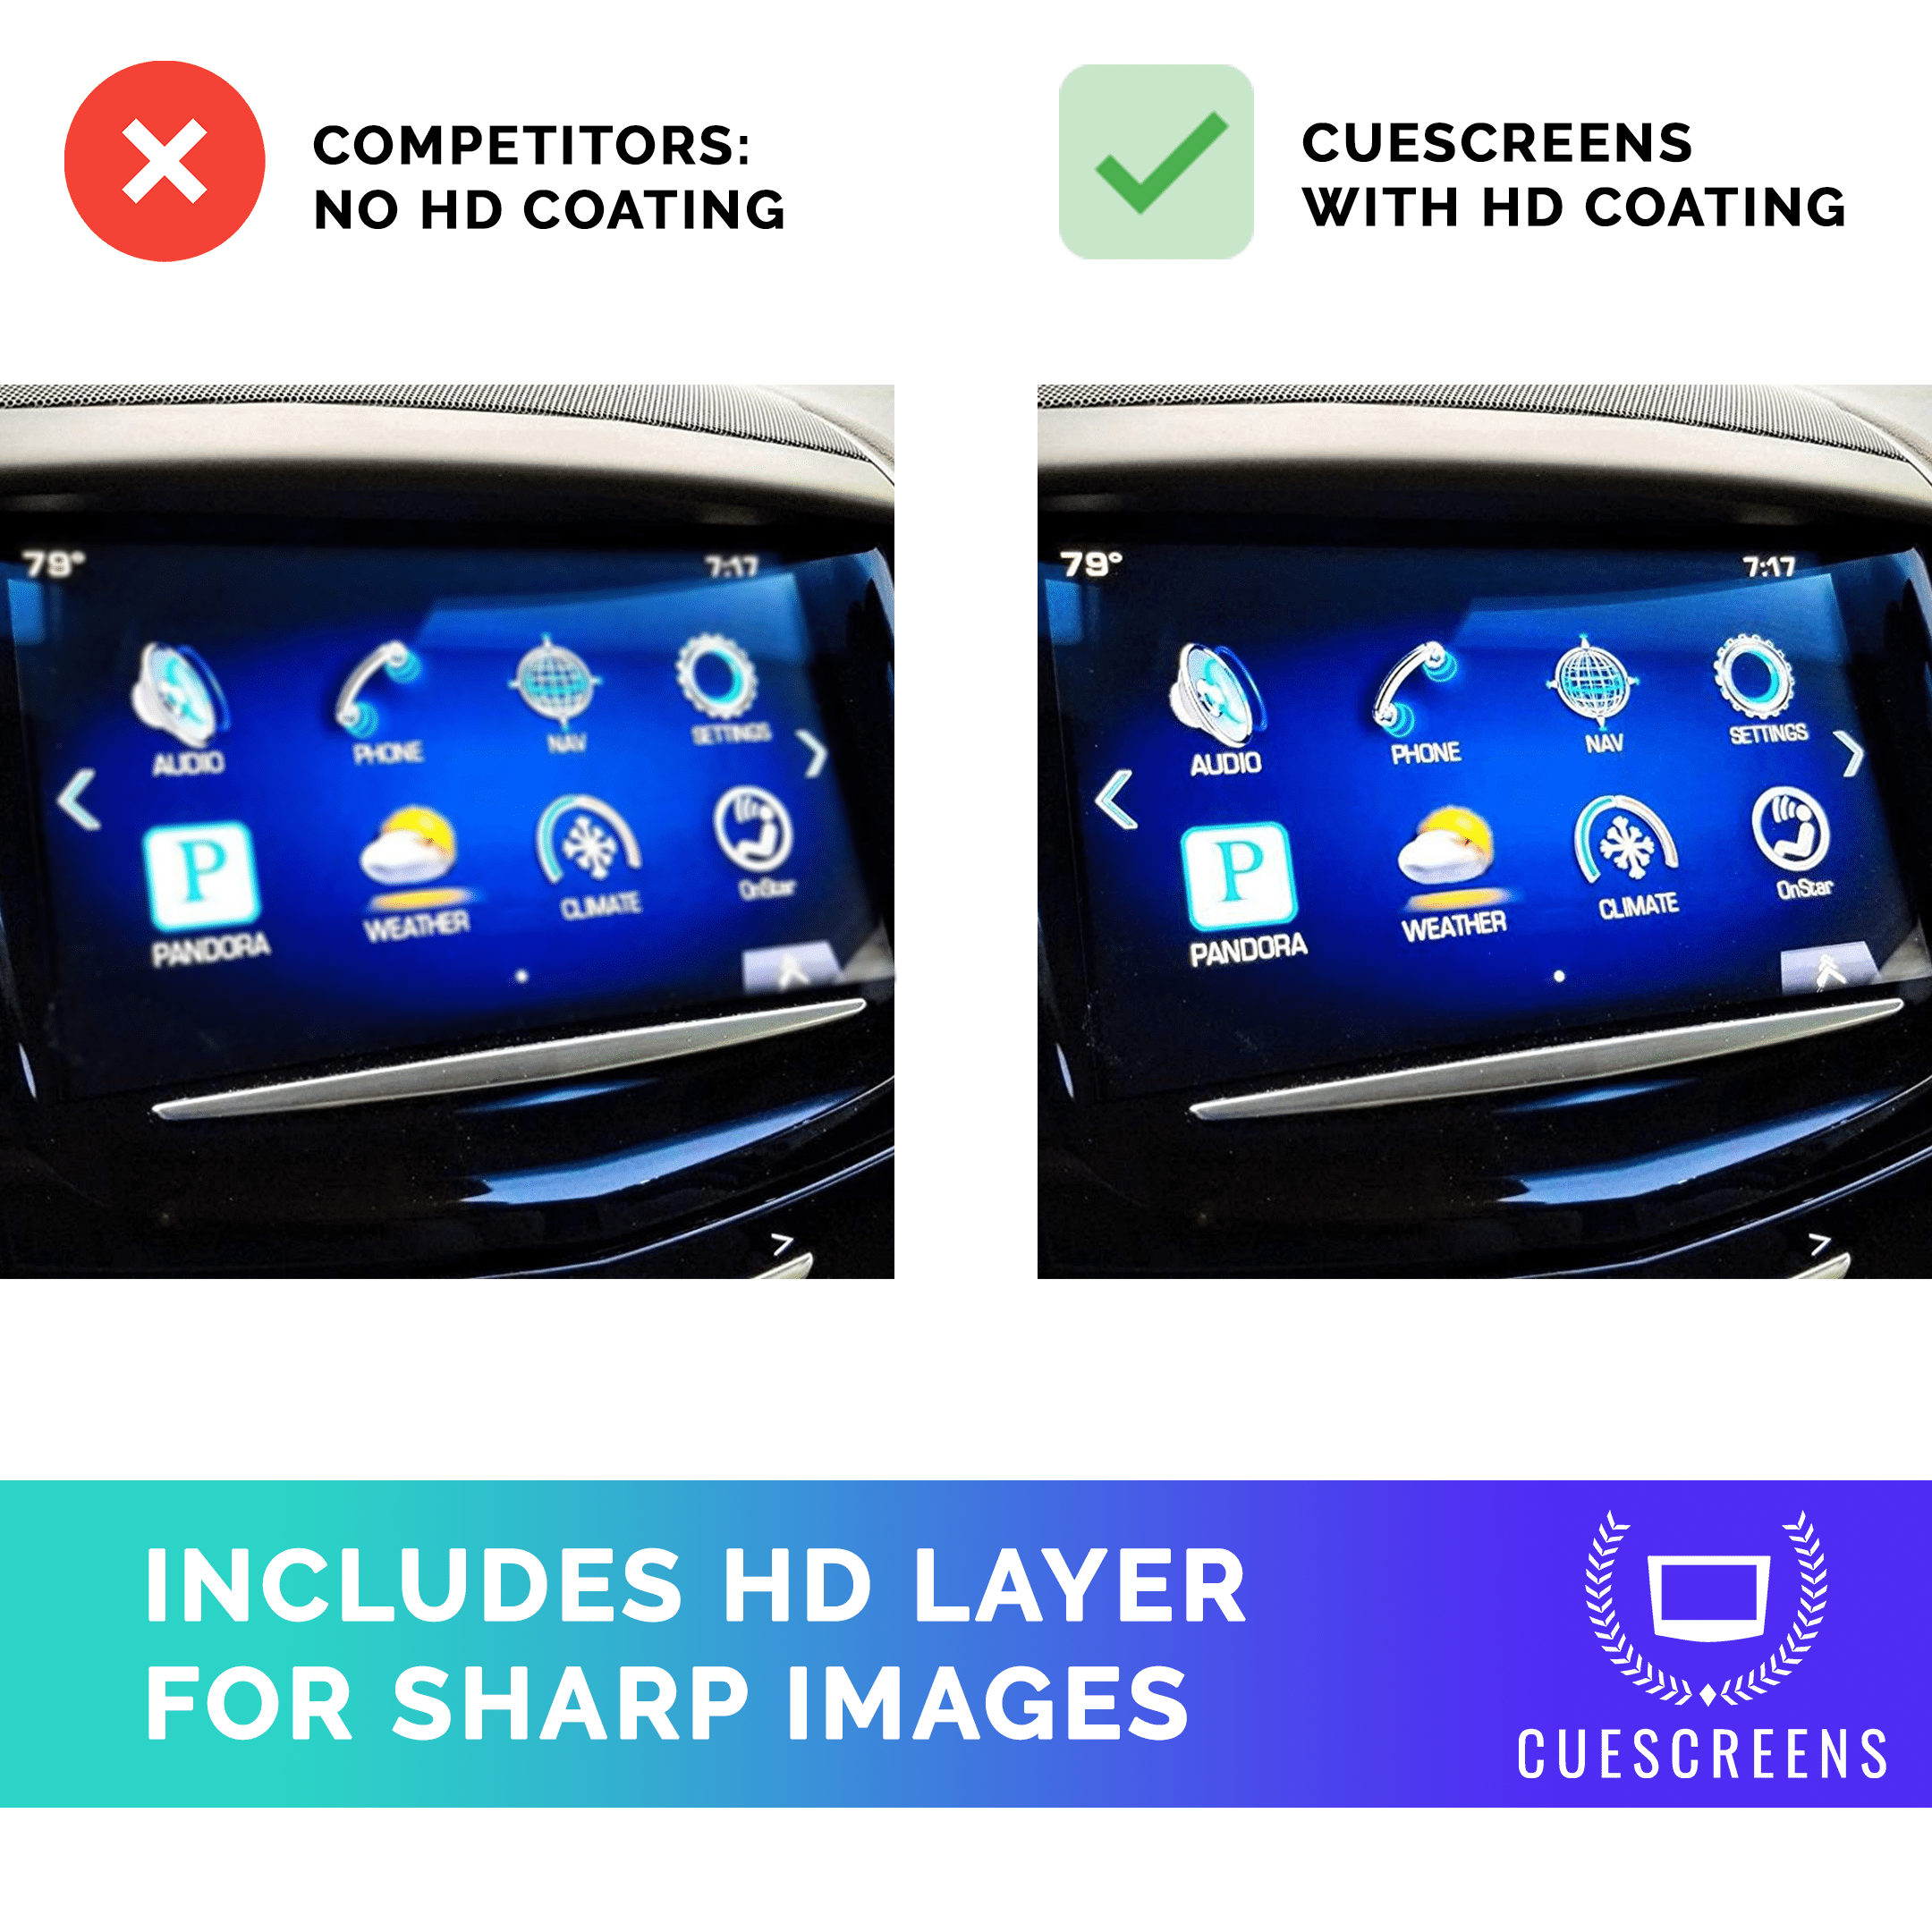 BlueHD OEM for Cadillac CUE Replacement Touch Screen Display Cuescreens Free Install Kit 